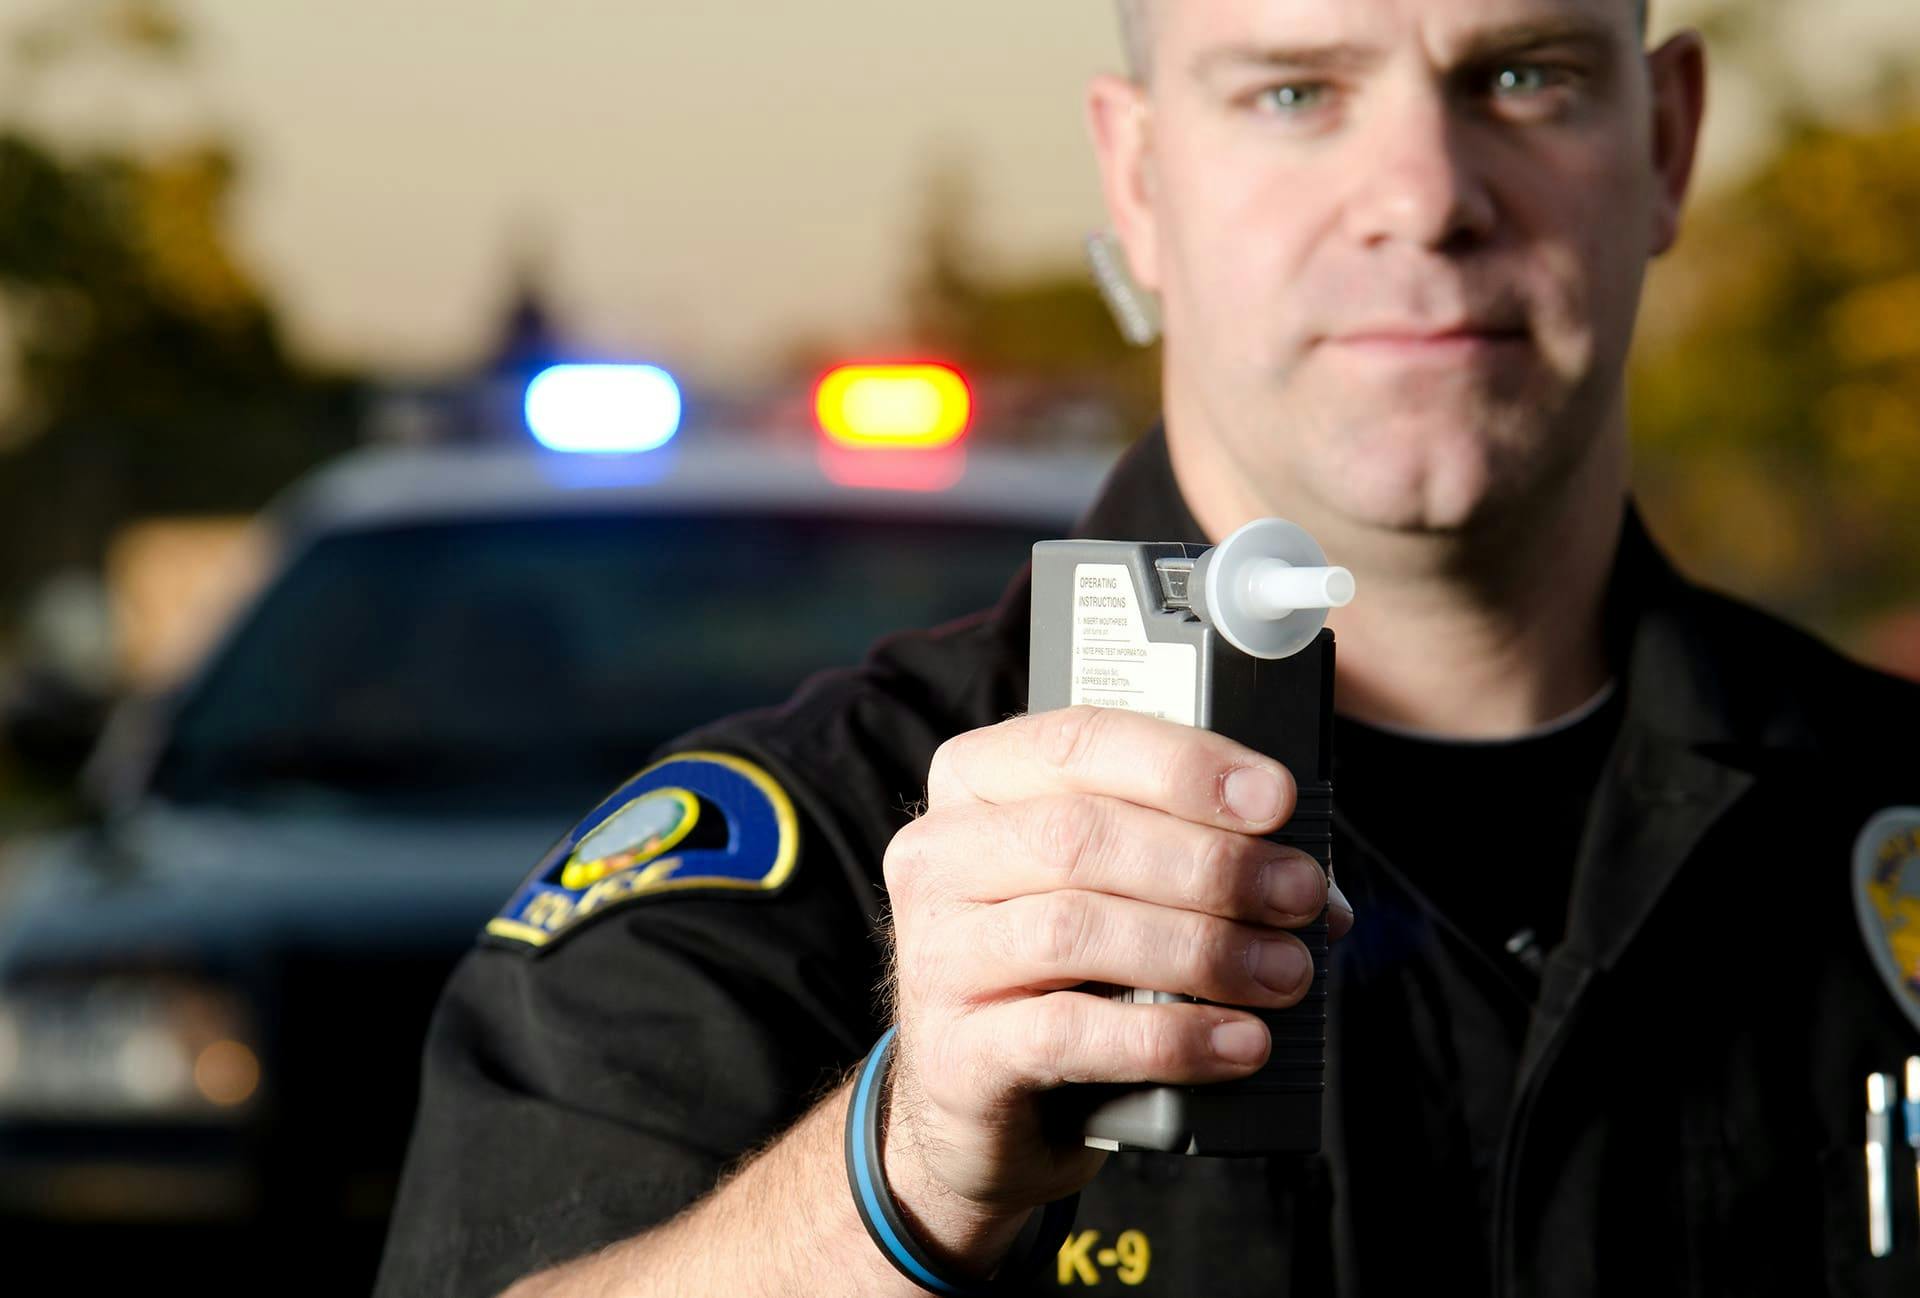 Officer holding up a breathalyzer to a person